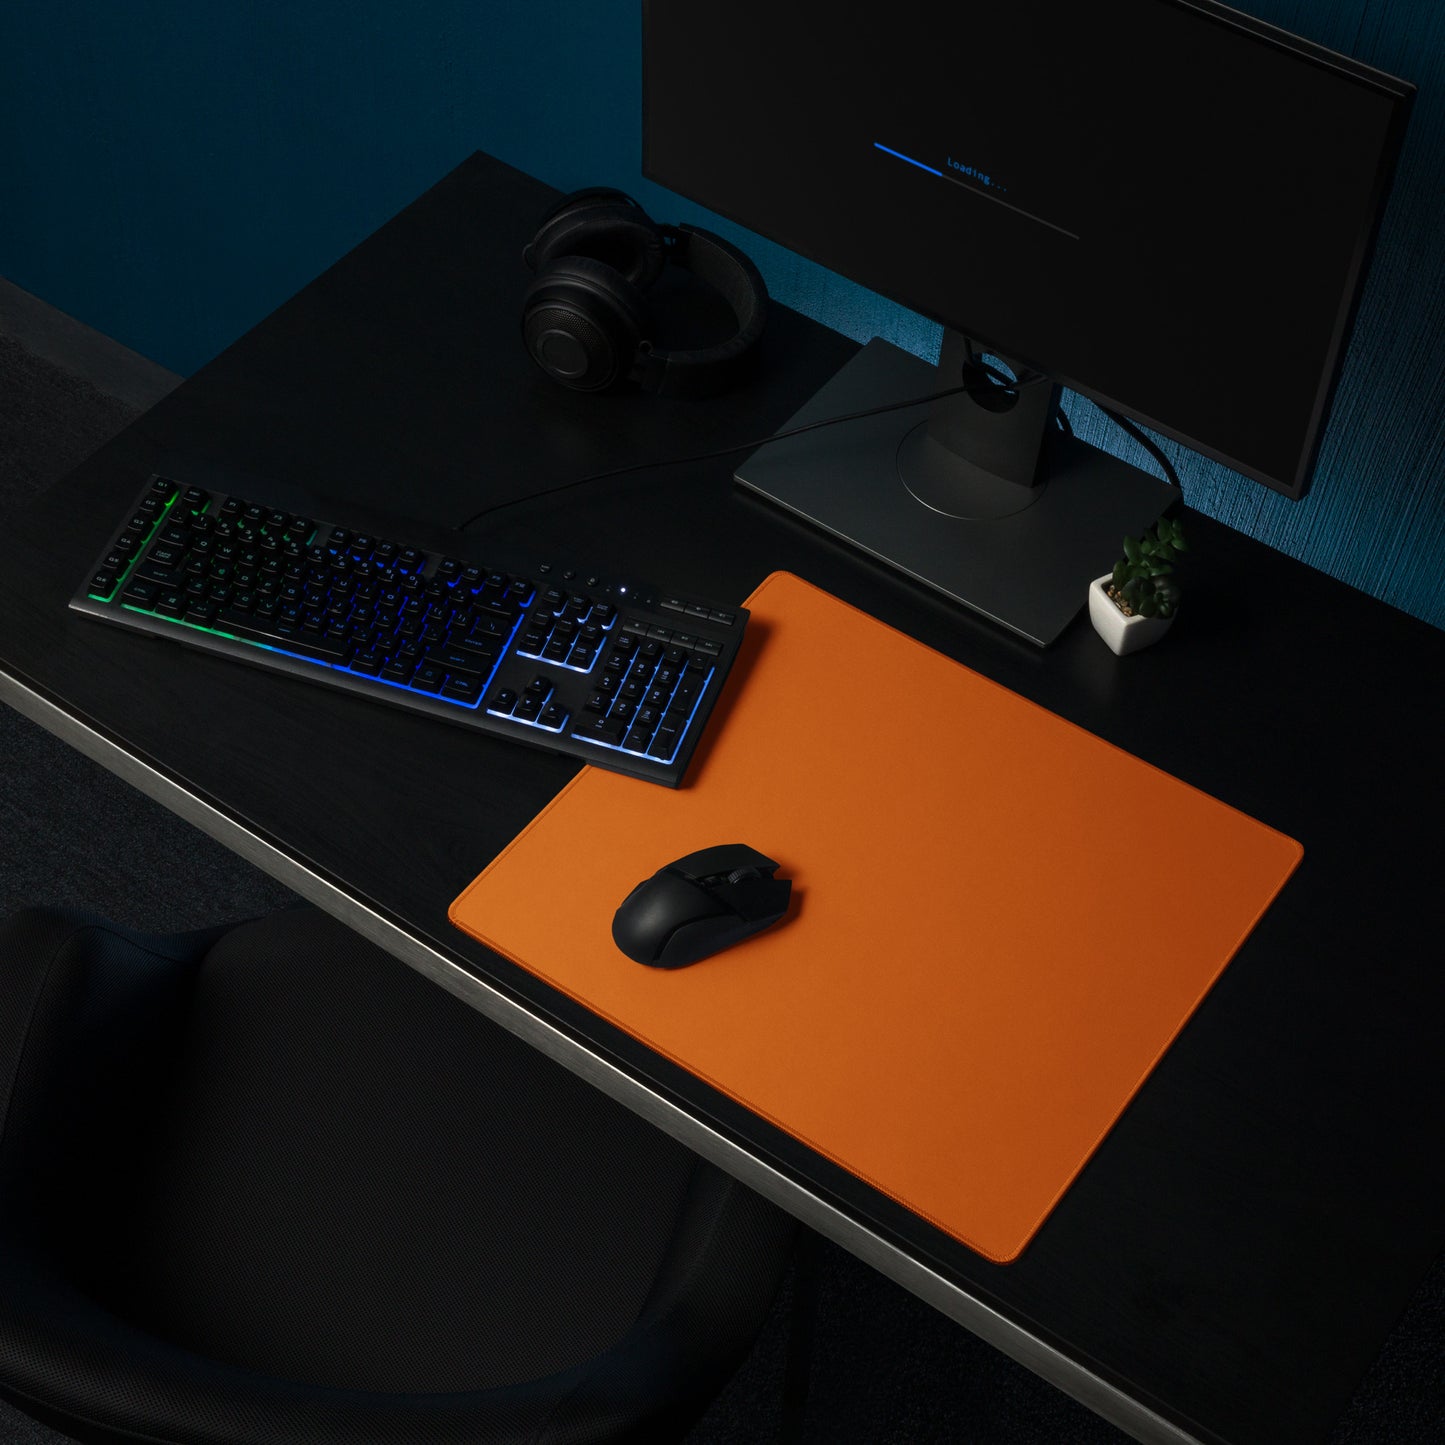 An 18" x 16" orange gaming desk pad sitting on a black desk with a monitor, keyboard, and mouse.